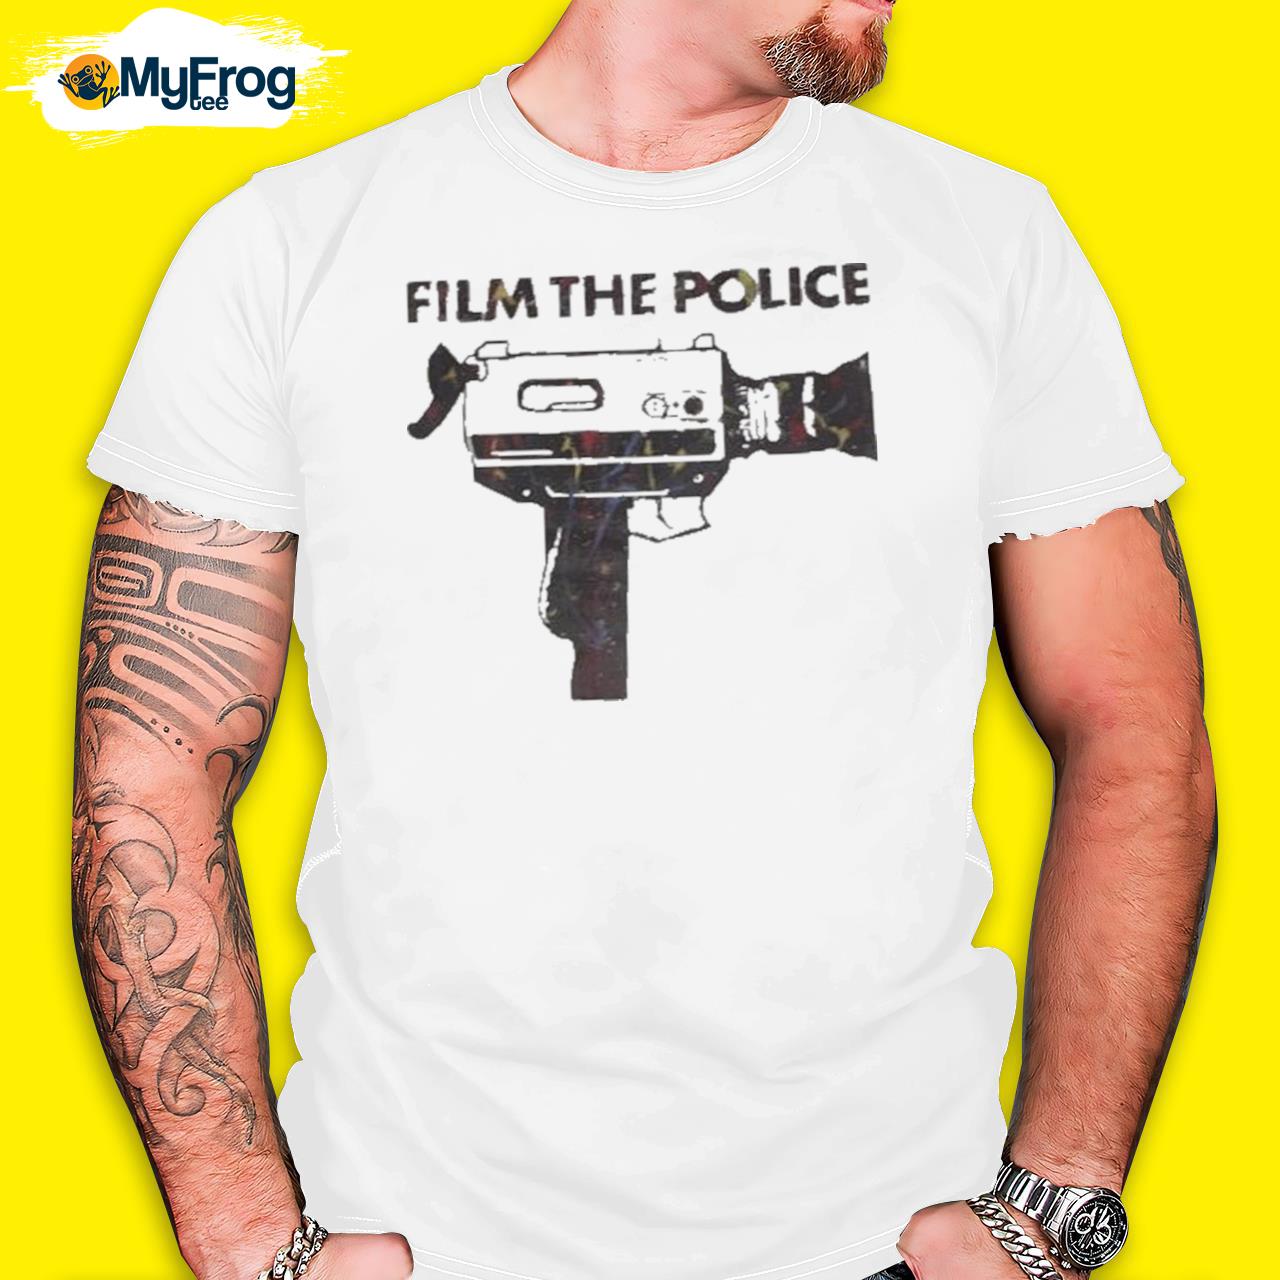 Film the police shirt